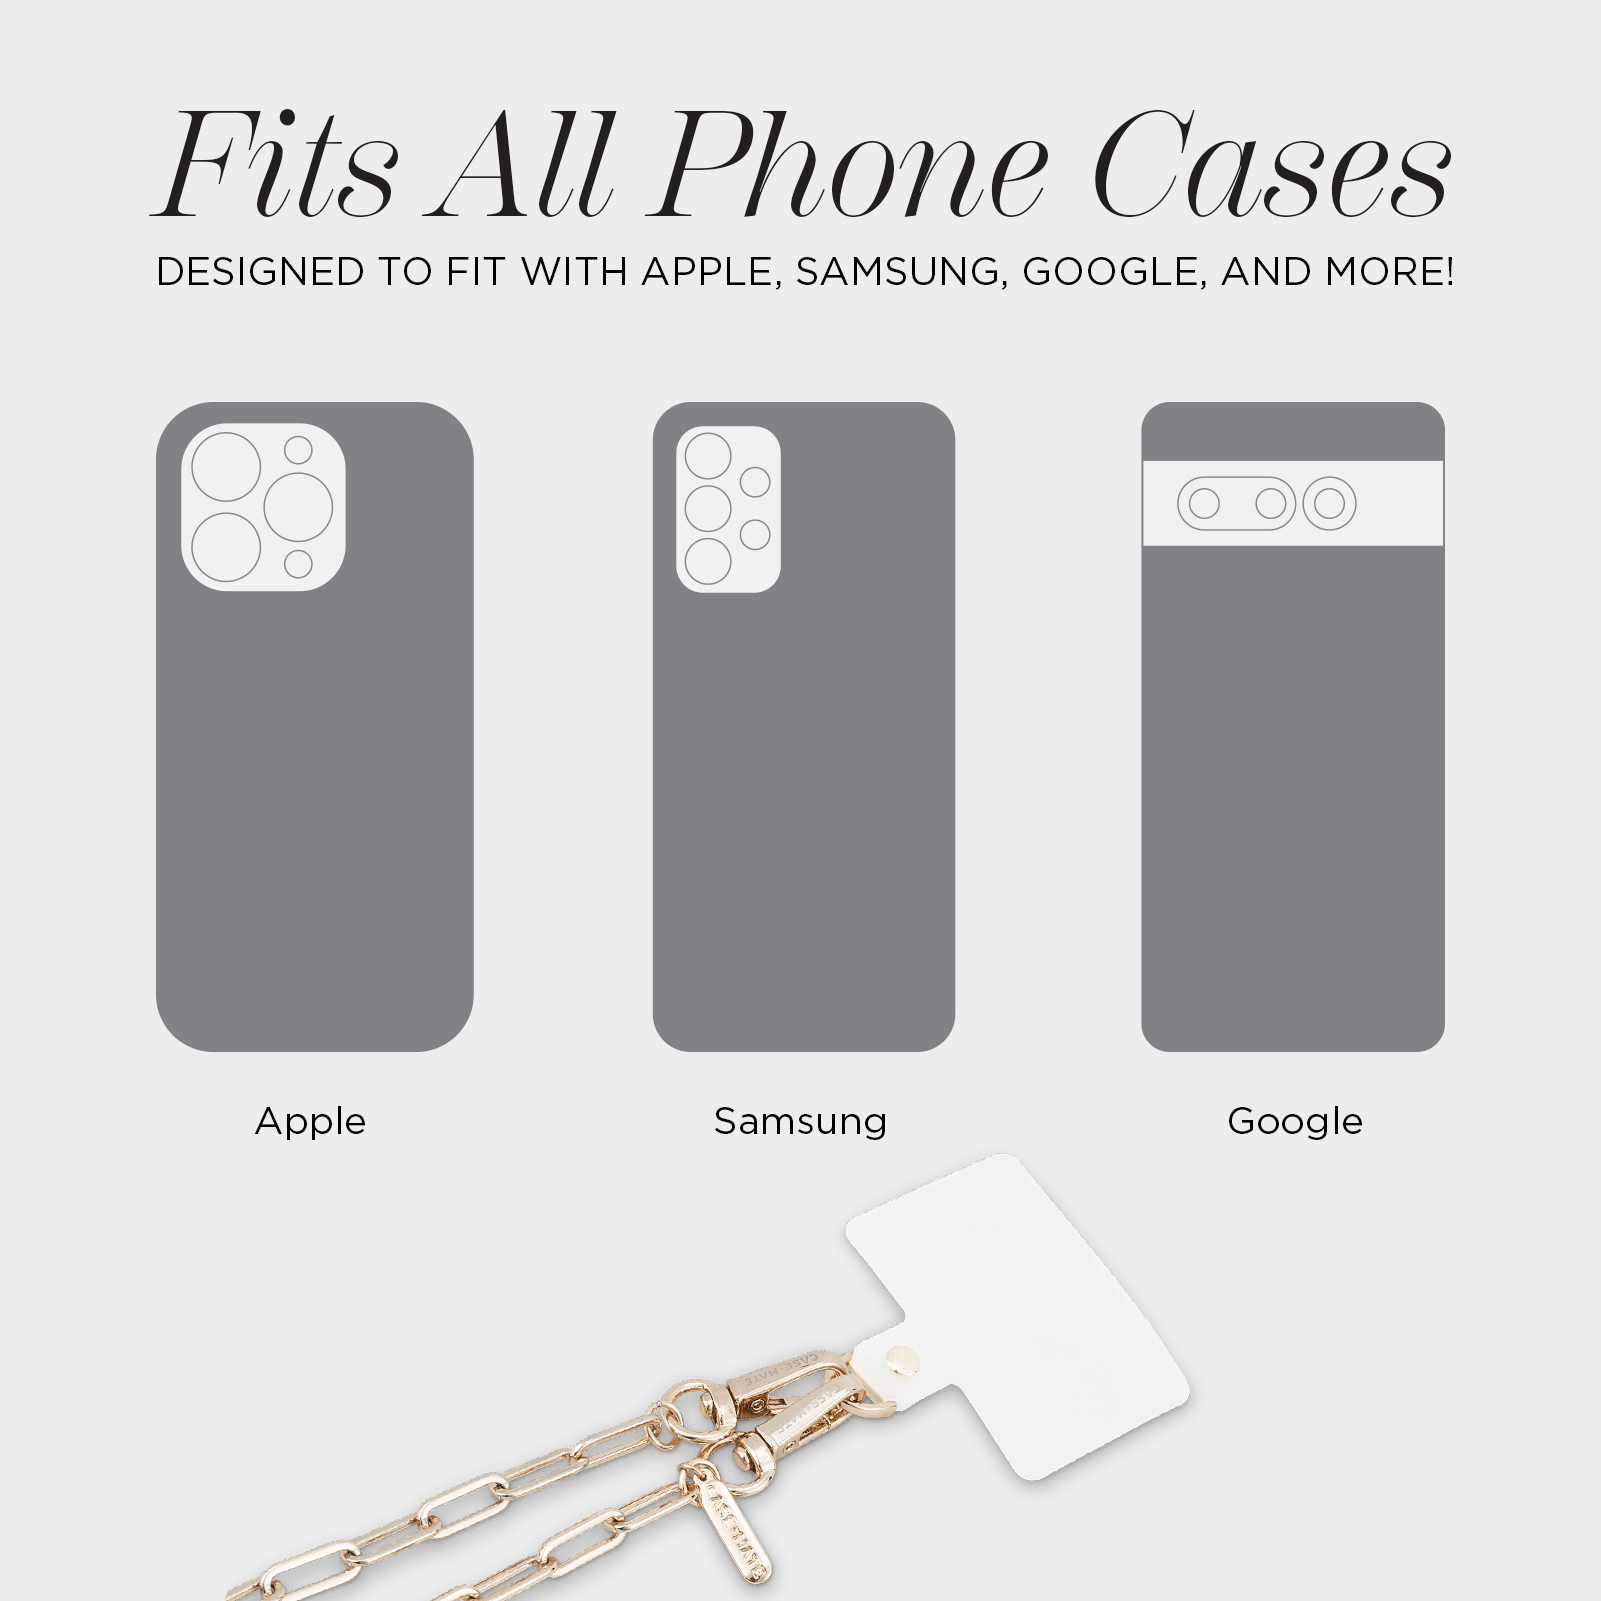 FITS ALL PHONE CASES. DESIGNED TO FIT WITH APPLE, SAMSUNG, GOOGLE, AND MORE!